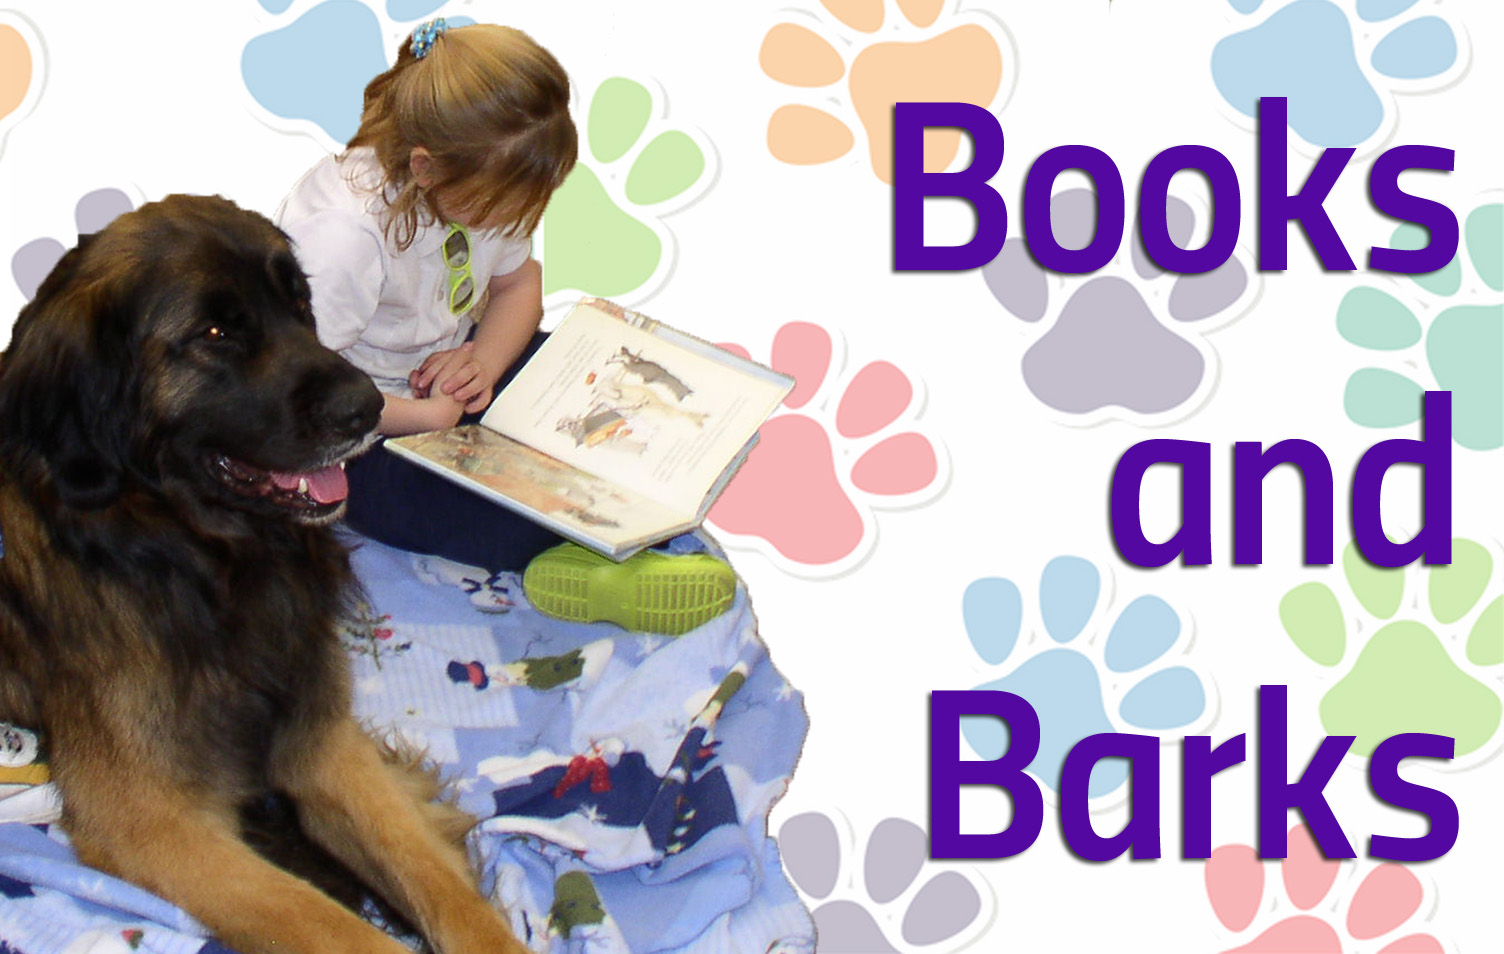 "Books and Barks" graphic with a child reading to a therapy dog